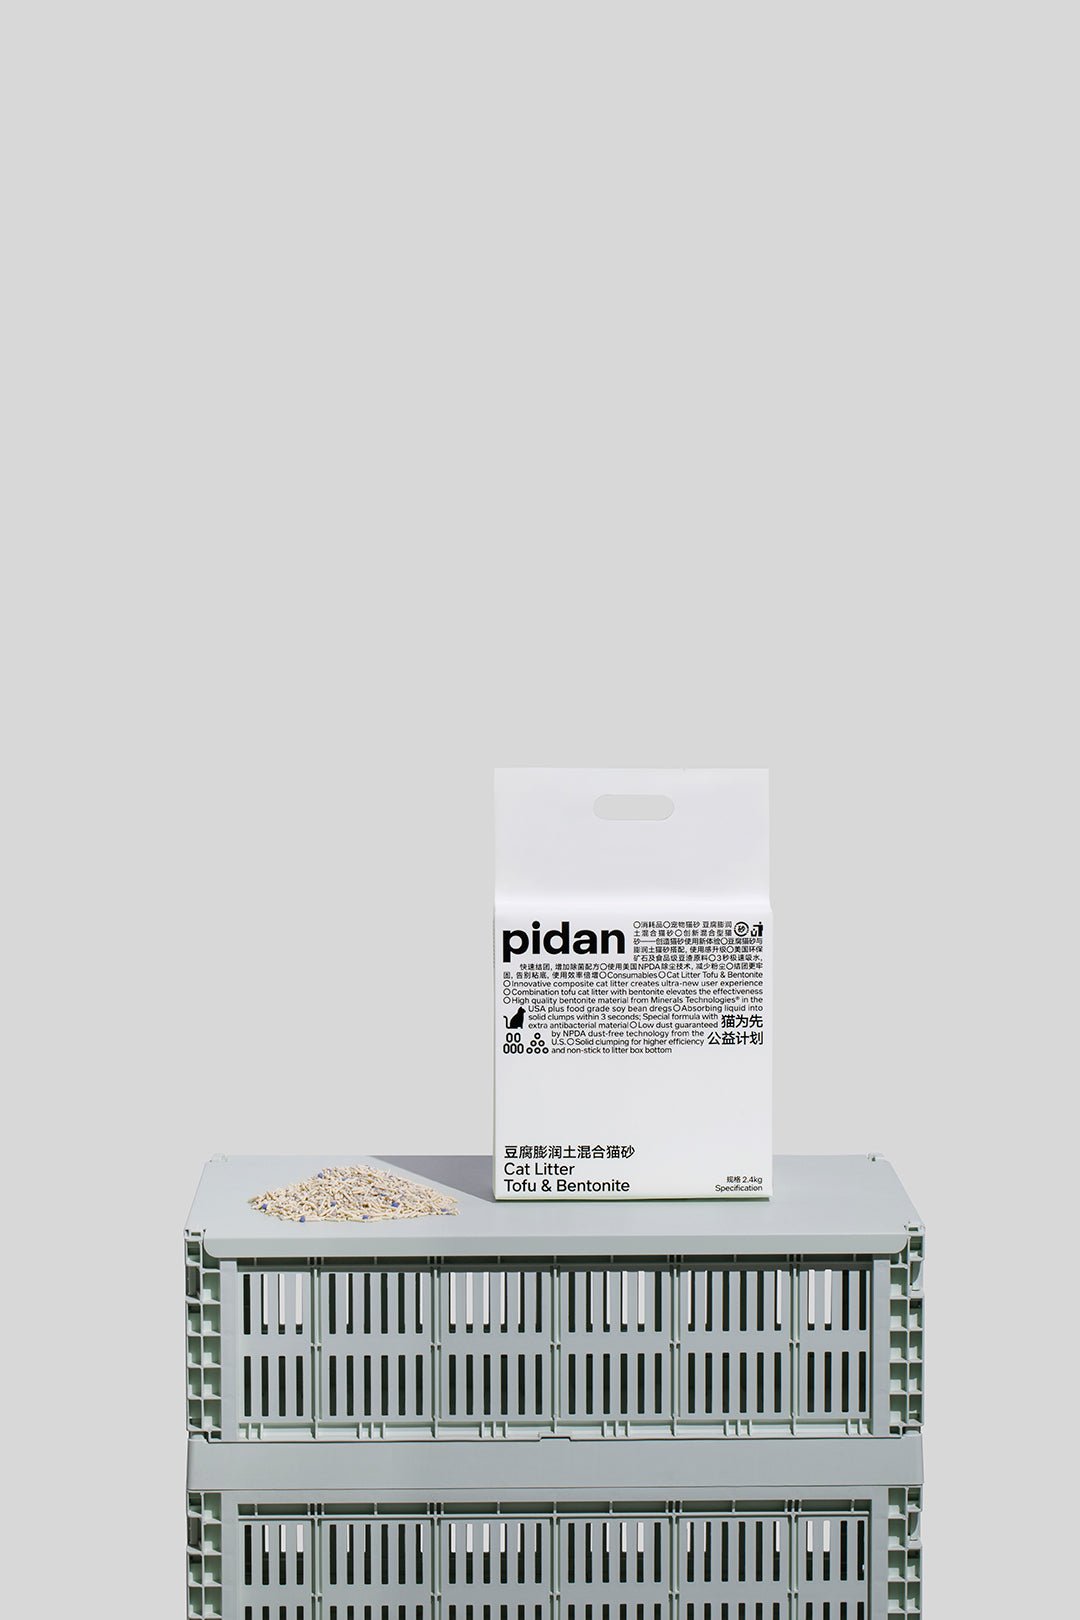 PIDAN Composite Tofu Cat Litter: Tofu & Crushed Bentonite 2.4KG - Ideal for Cats with Sensitive Urinary Systems - PAWS CLUB